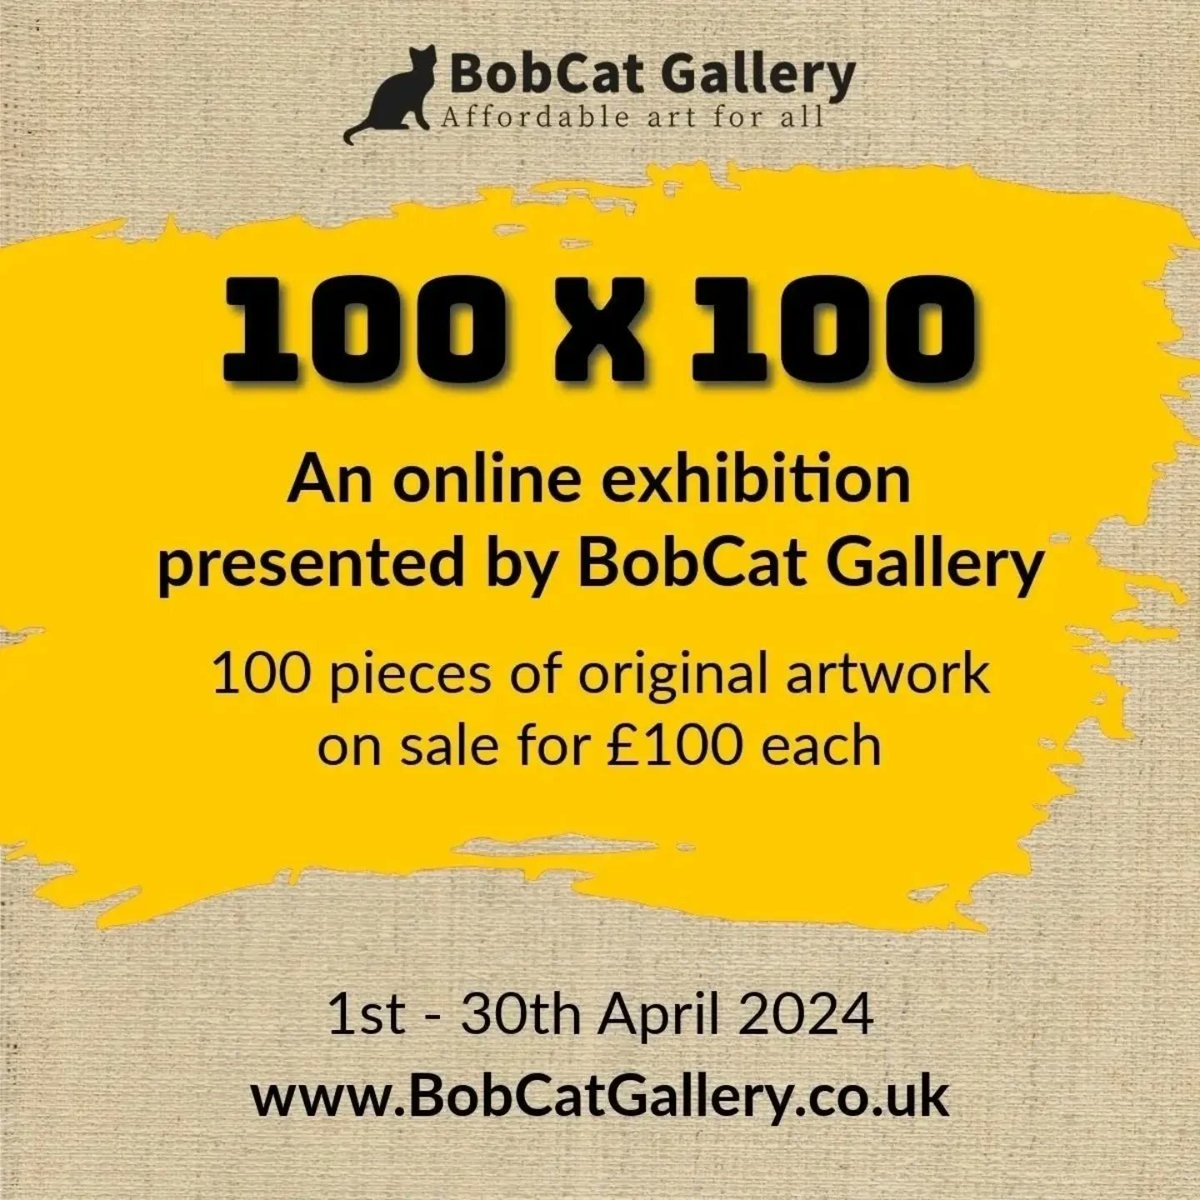 ✨ Last chance! ✨ Our virtual exhibition comes to an end tomorrow, so if you've had your eye on one of the 100 pieces of original & limited edition art included, now is the time to buy... Everything is just £100 +p&p, some amazing arty bargains included! BobCatGallery.co.uk